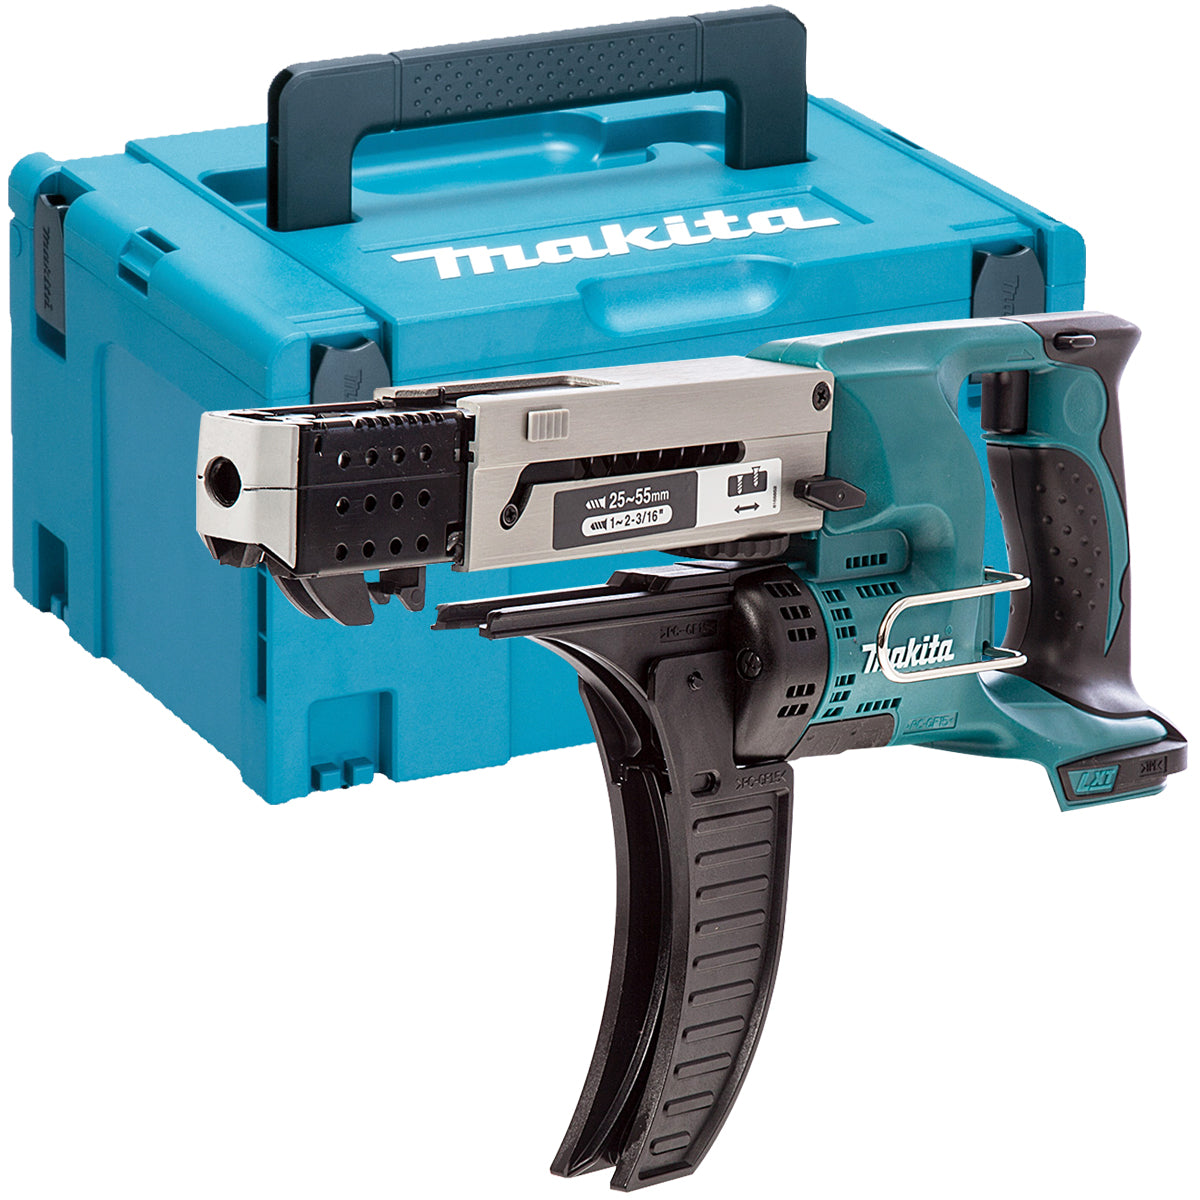 Makita 18v LXT Auto Feed Drywall Collated Screwdriver Bare + M Tools4trade.co.uk